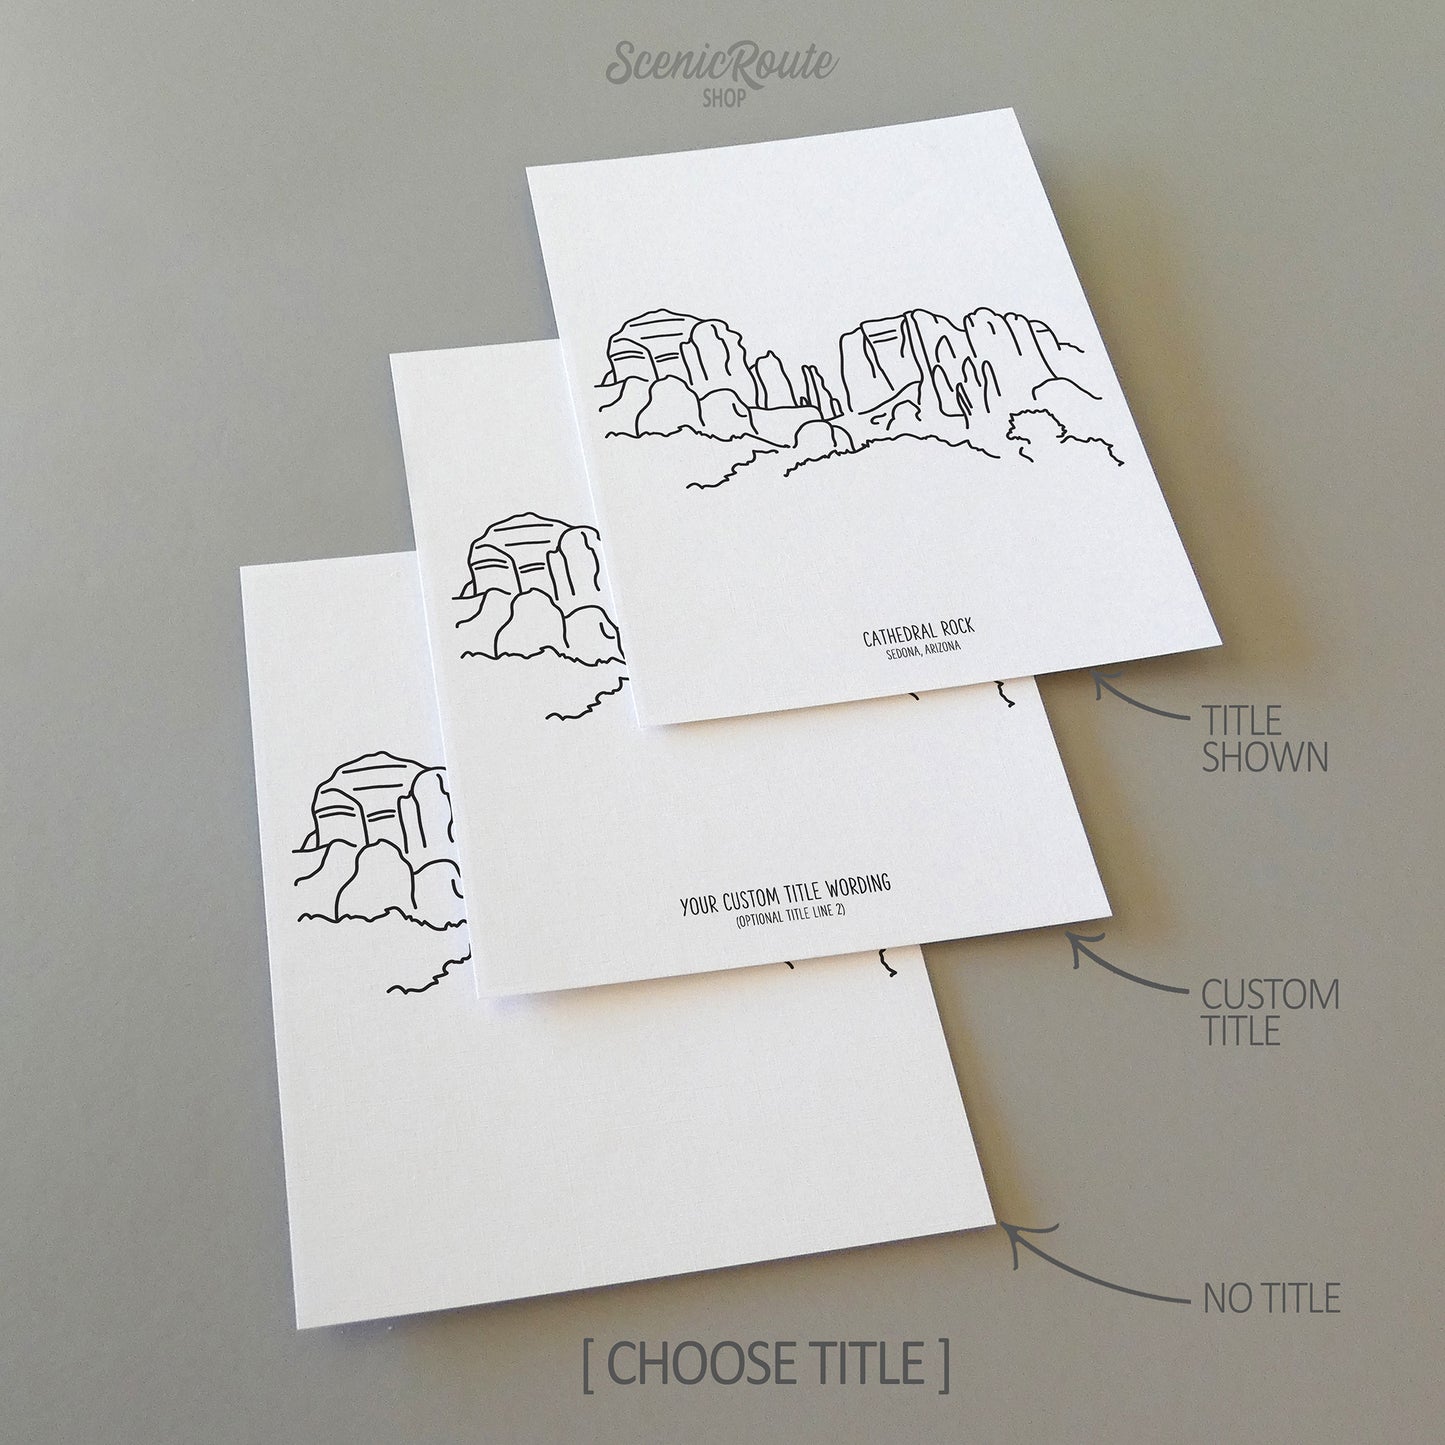 Three line art drawings of Cathedral Rock in Sedona Arizona on white linen paper with a gray background.  The pieces are shown with title options that can be chosen and personalized.